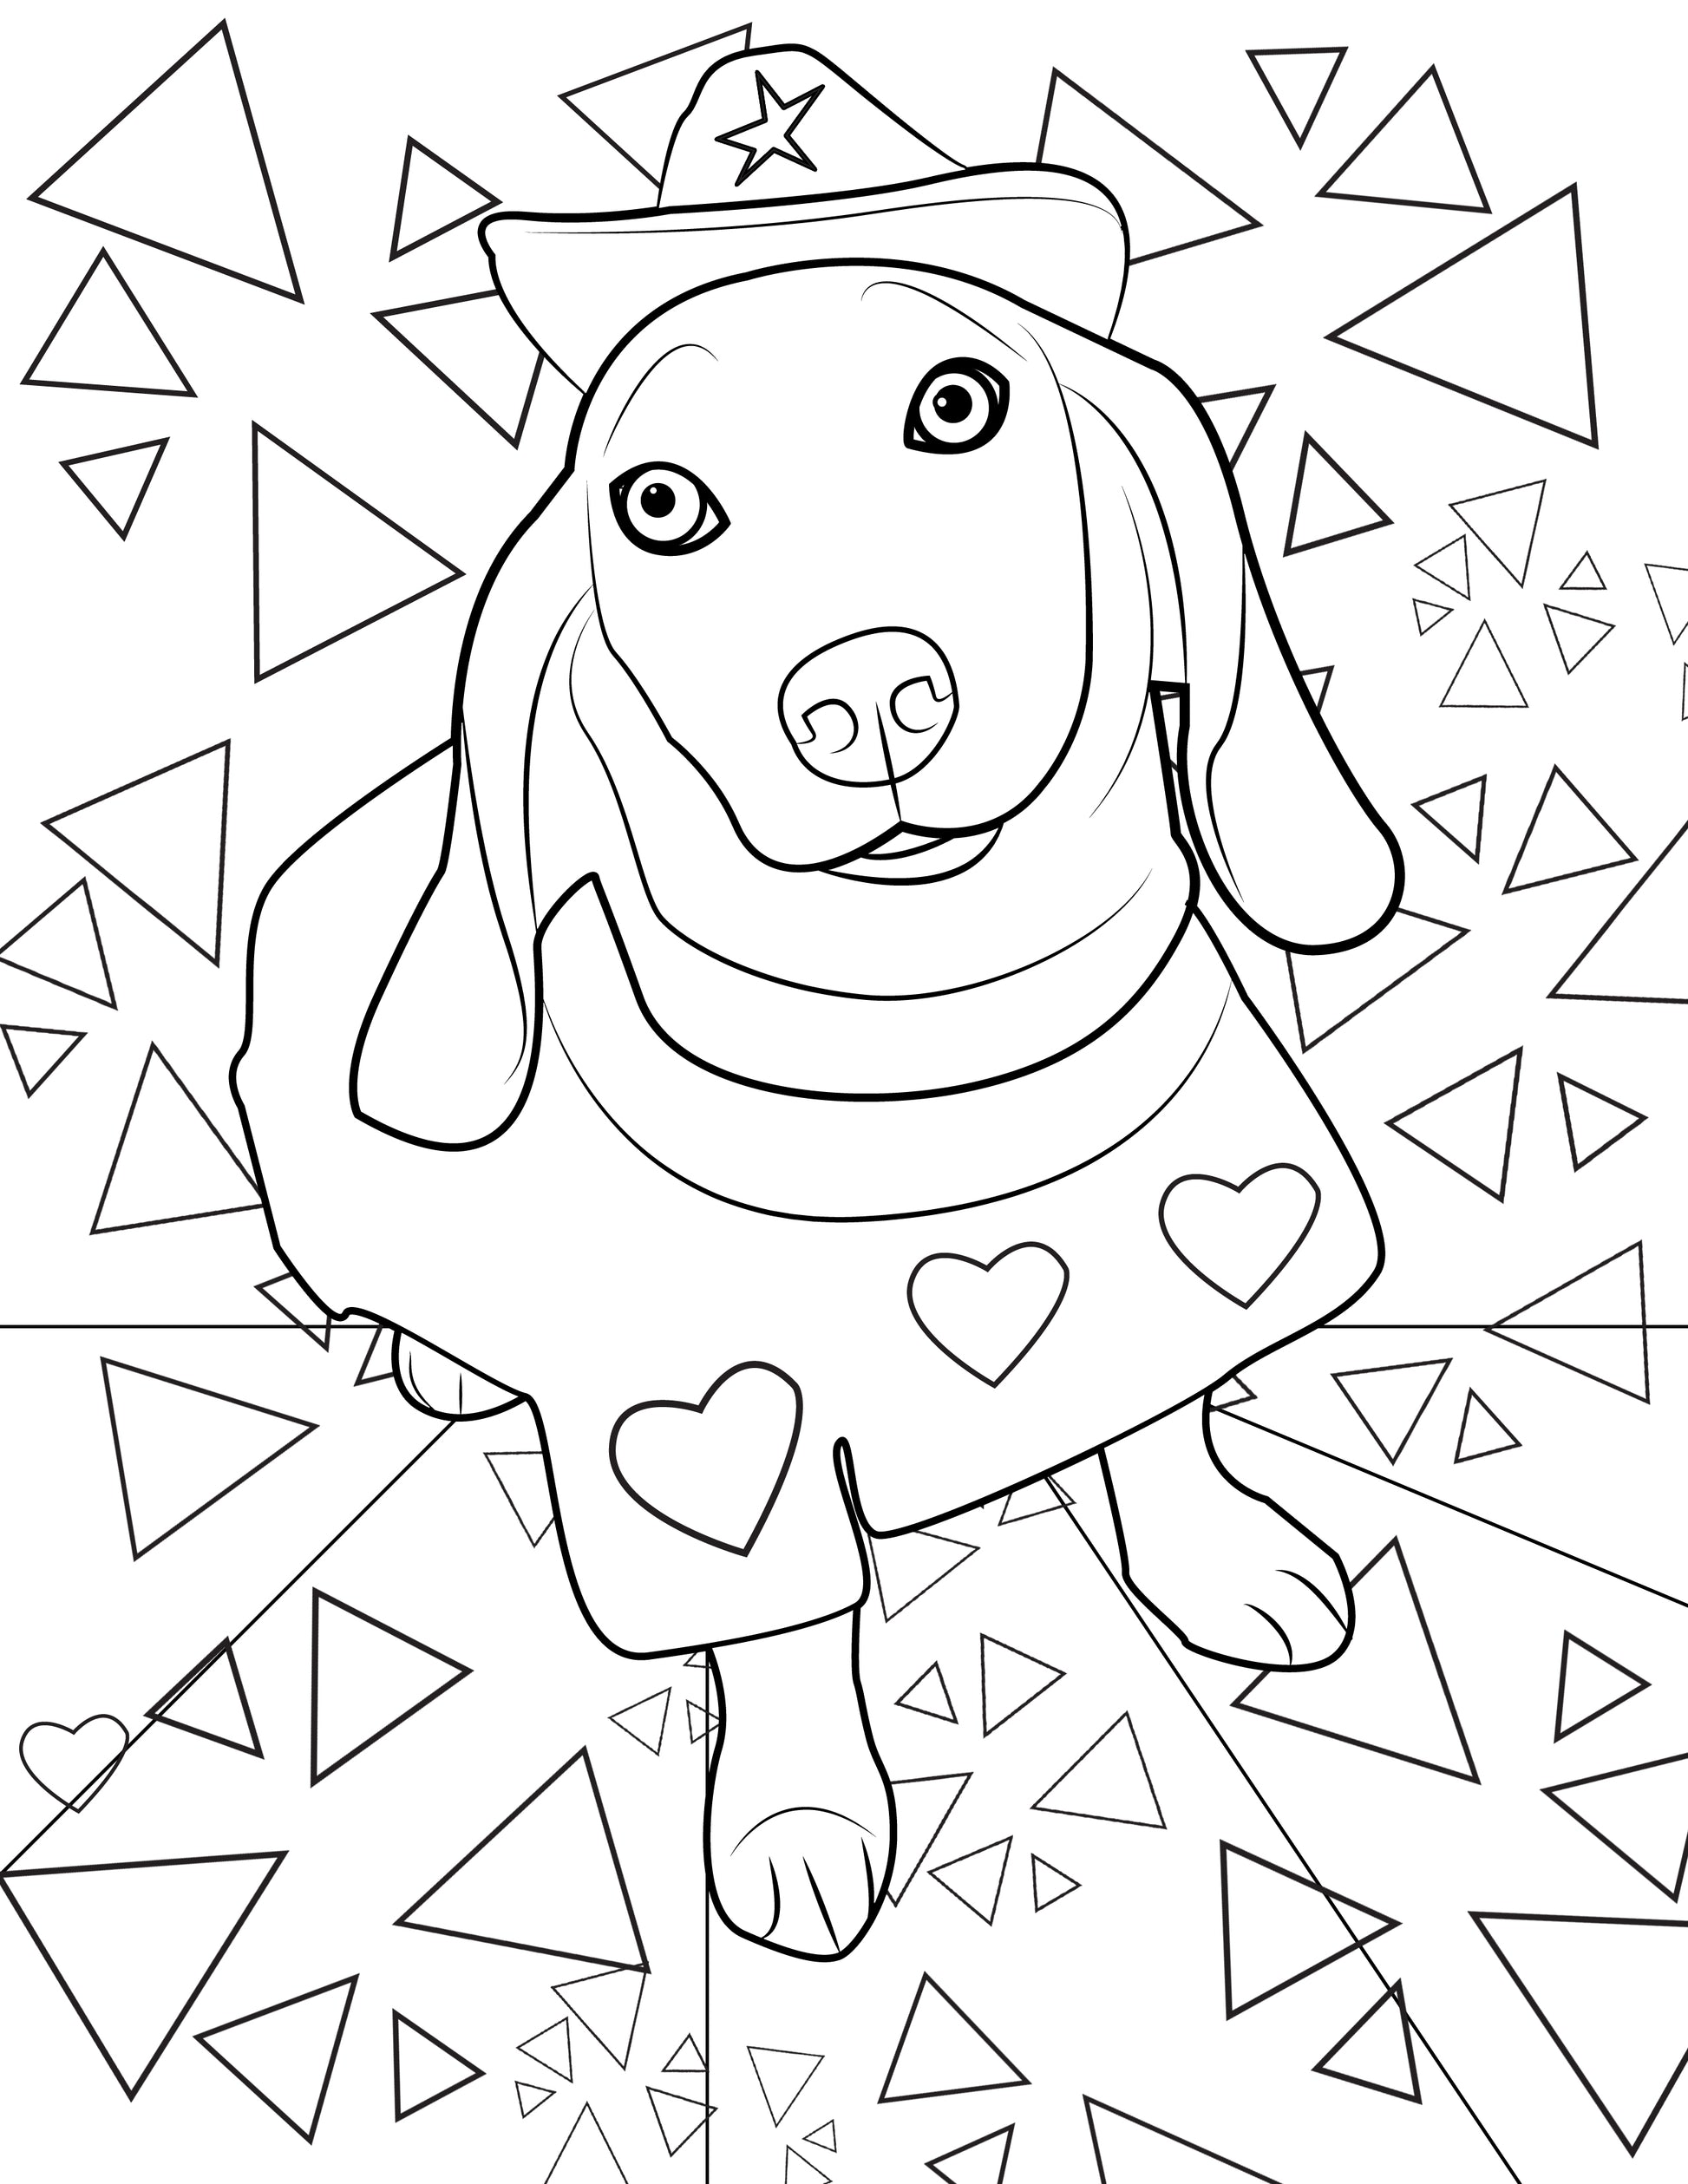 Tired Dog Coloring Book – Brittany Farina Art